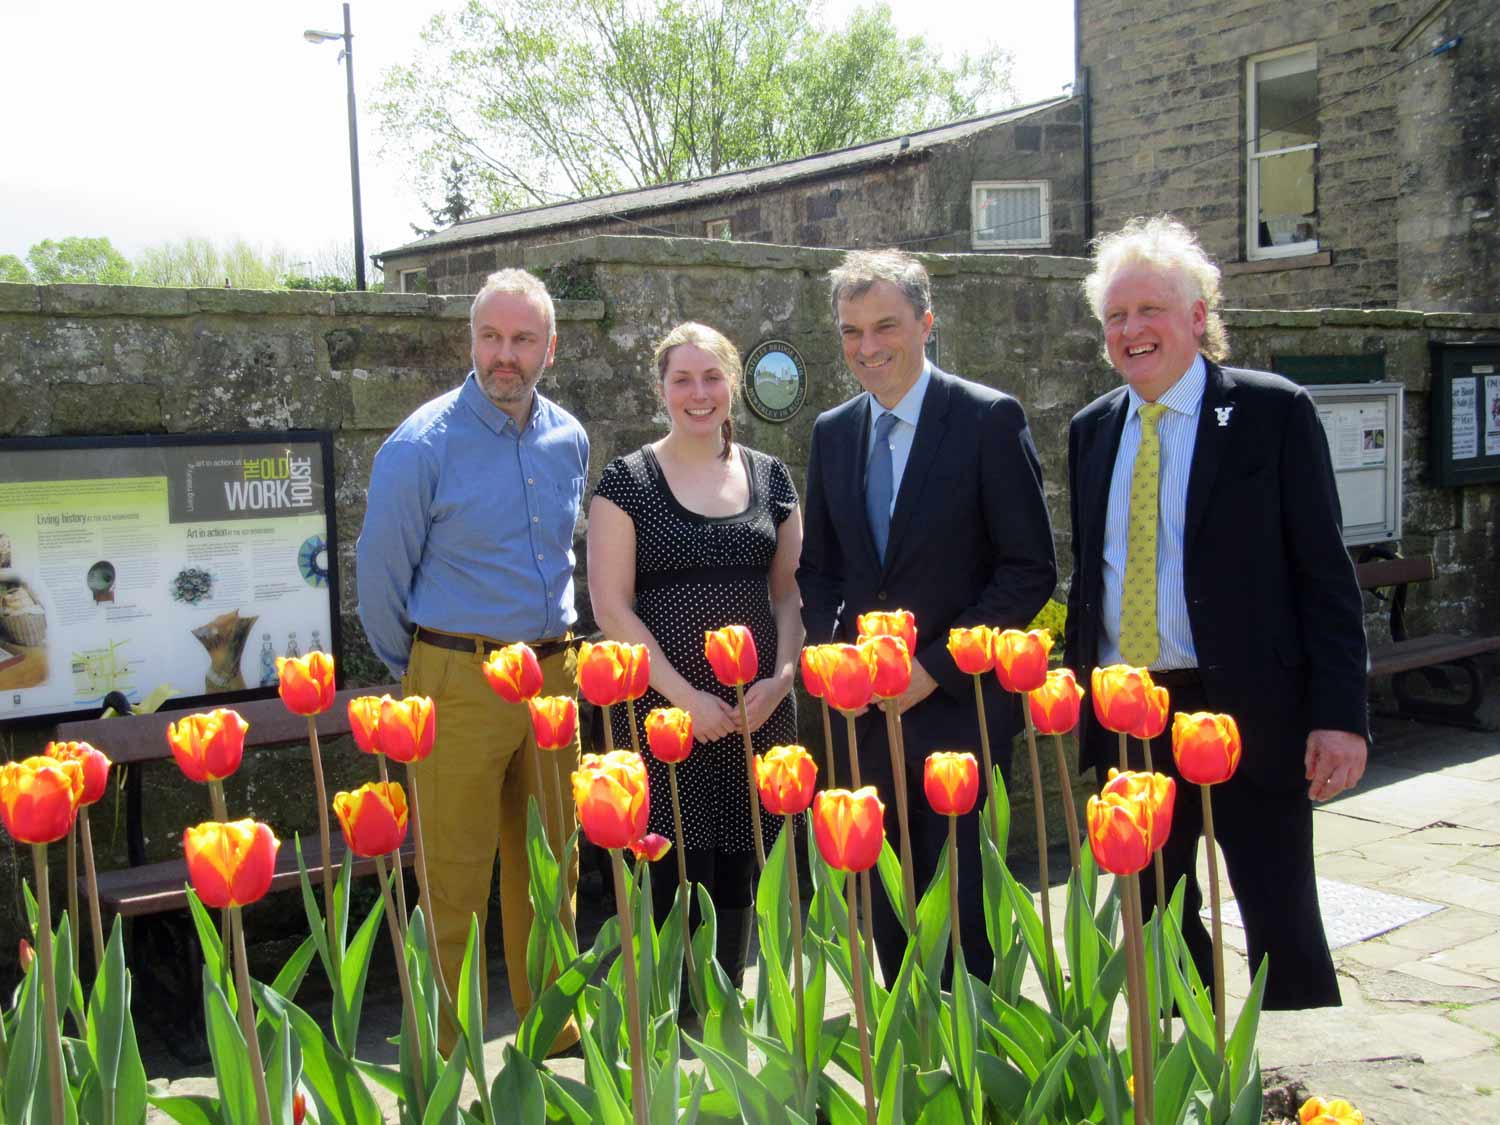 Tim Ledbetter and Kirsty Shepherd (Nidderdale Chamber of Trade), Julian Smith MP and Keith Tordoff (Chairman of Nidderdale Chamber of Trade)